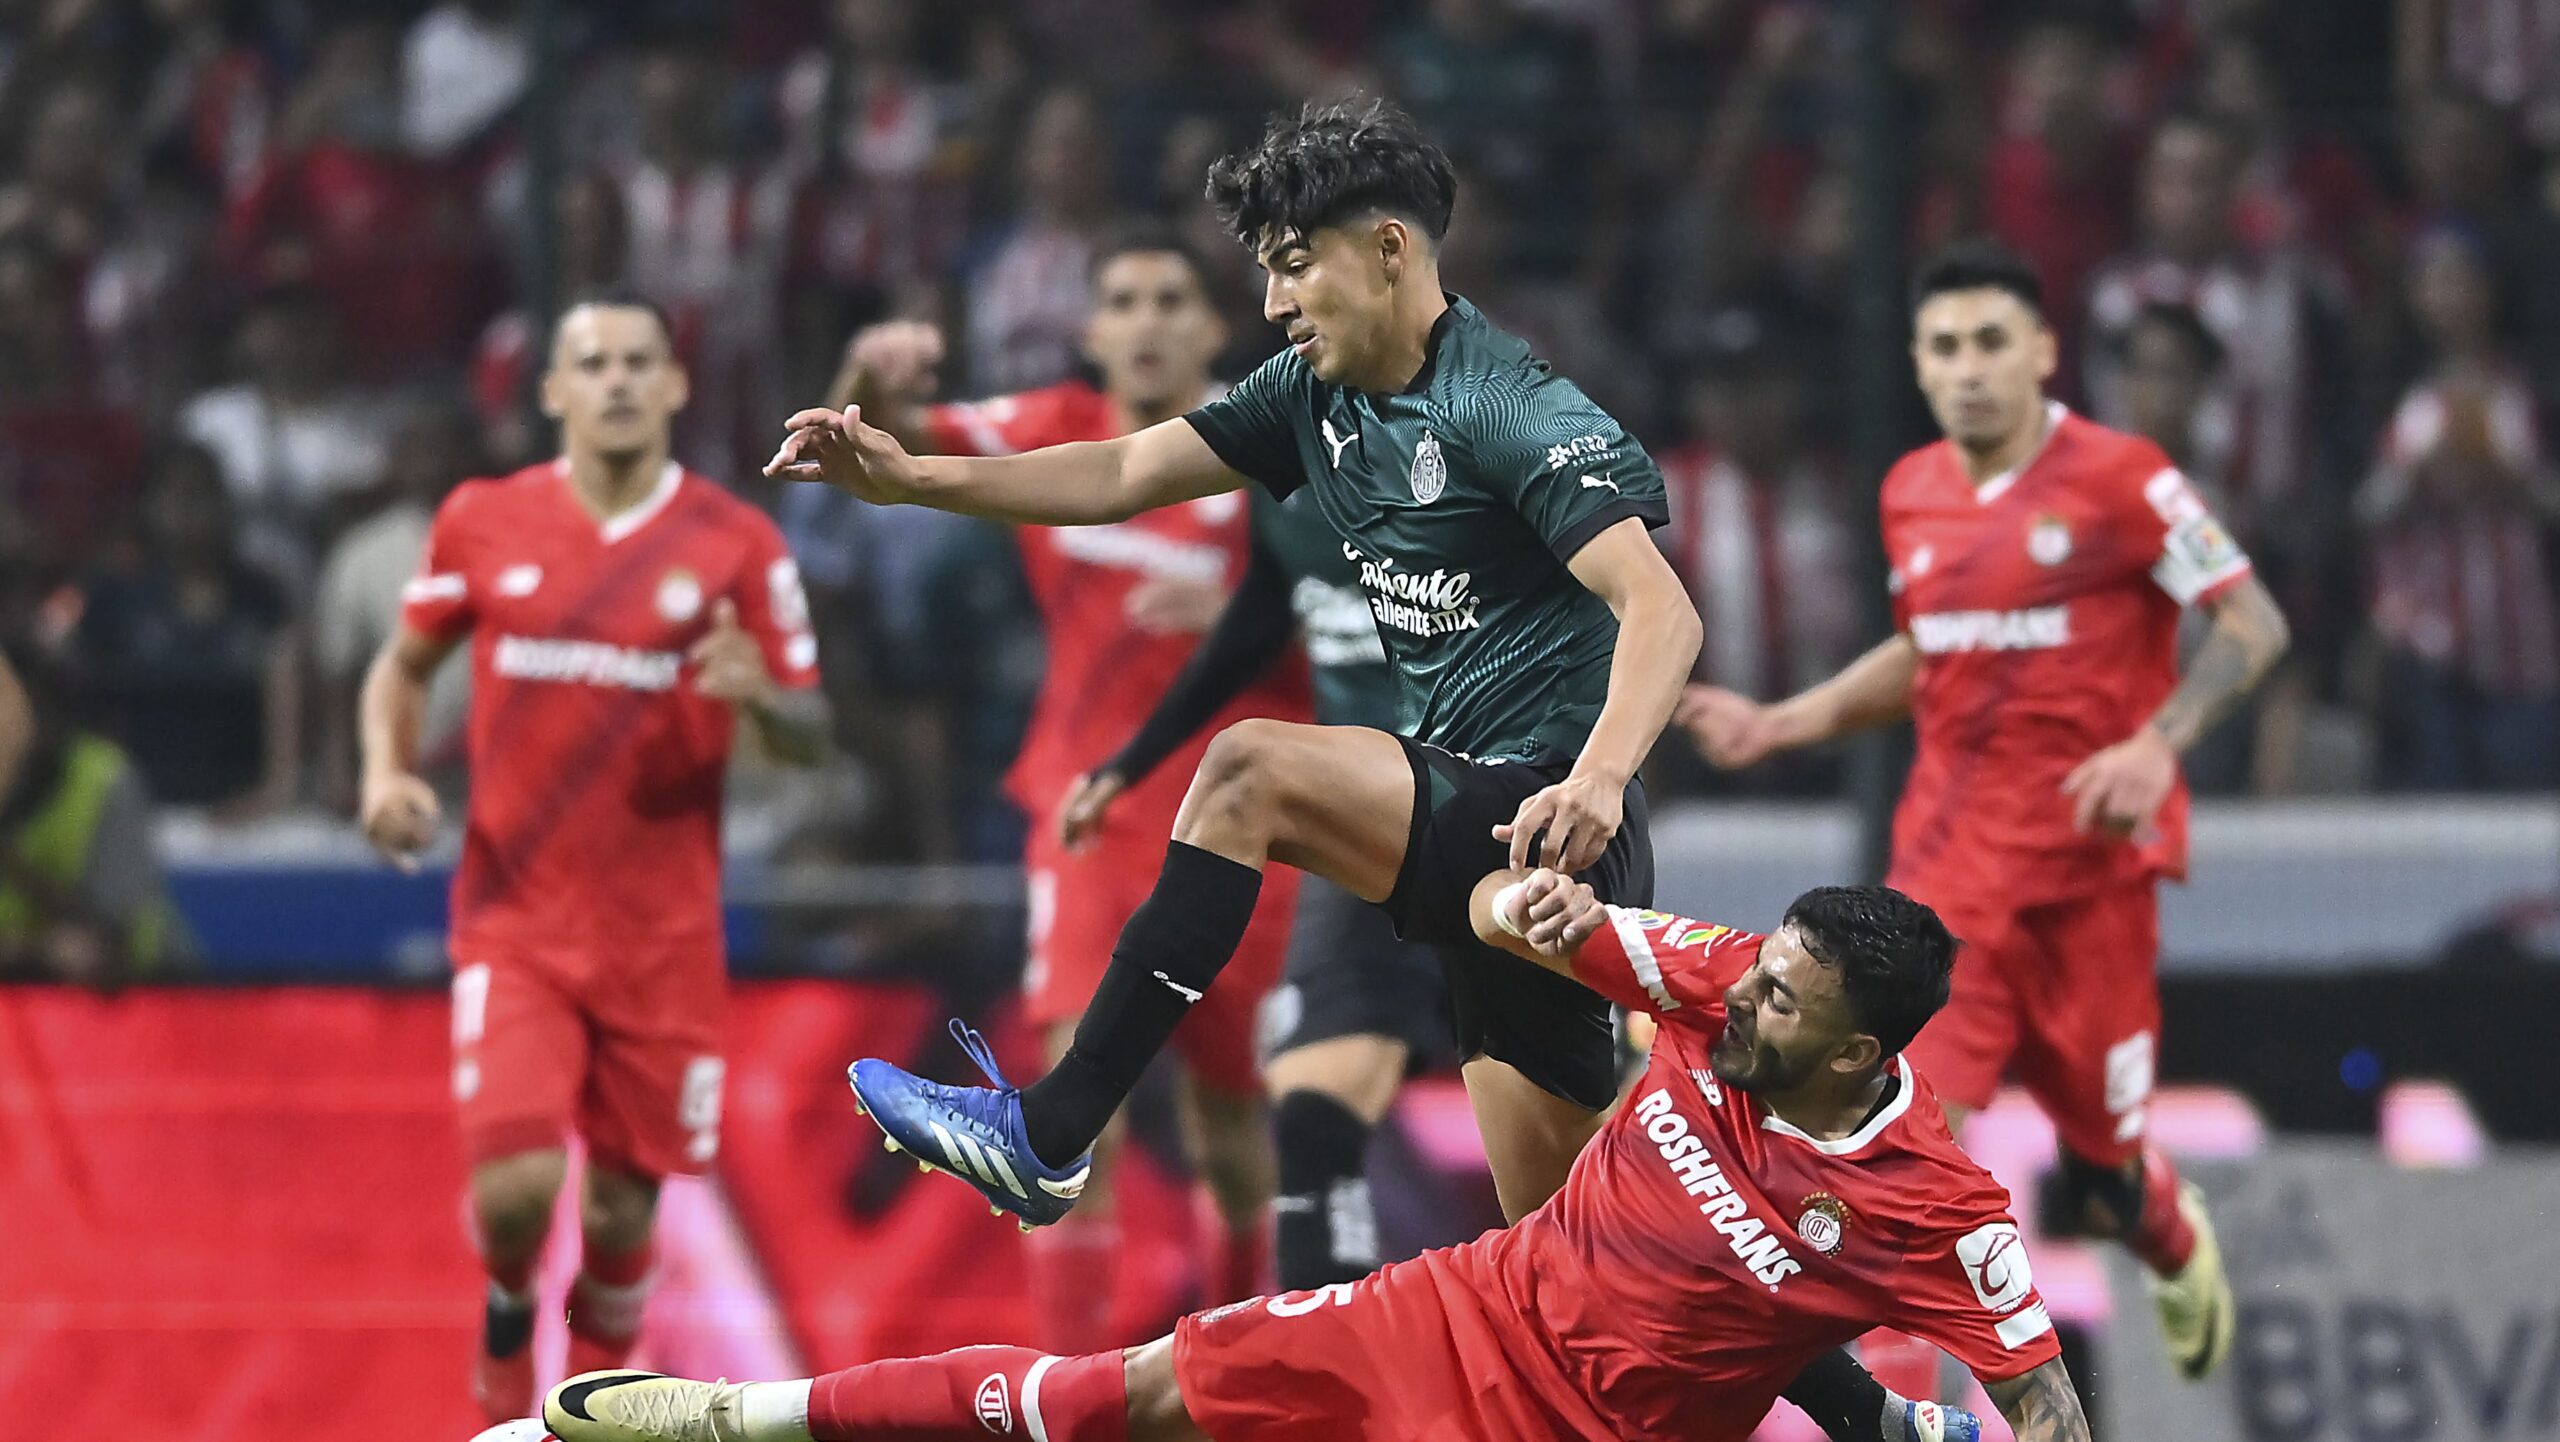 chivas-put-out-the-“hell”-in-toluca-and-advanced-to-the-semifinals-with-a-0-0-draw